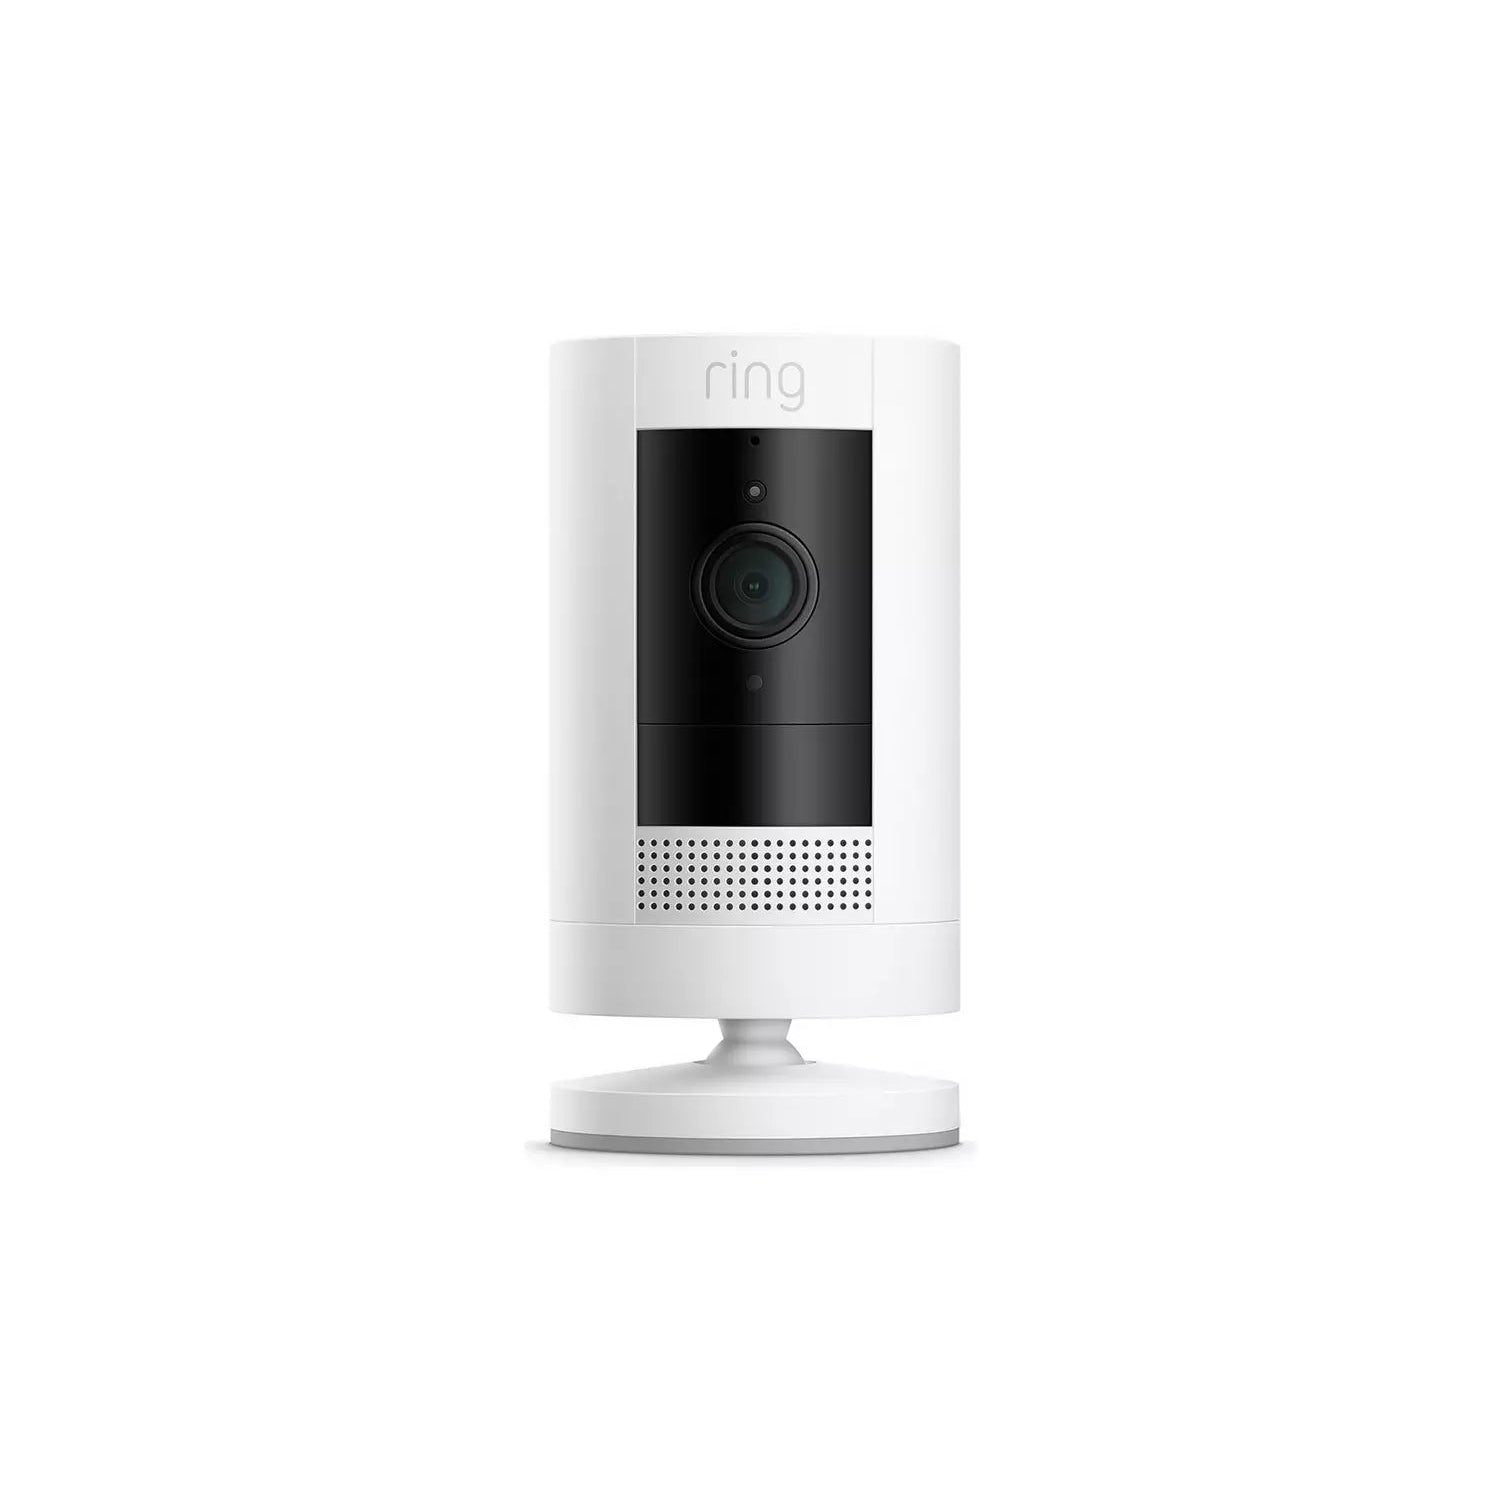 Ring Stick Up Cam Plug-In 3rd Gen Security Camera - White - MISSING ACCESSORIES - Refurbished Fair